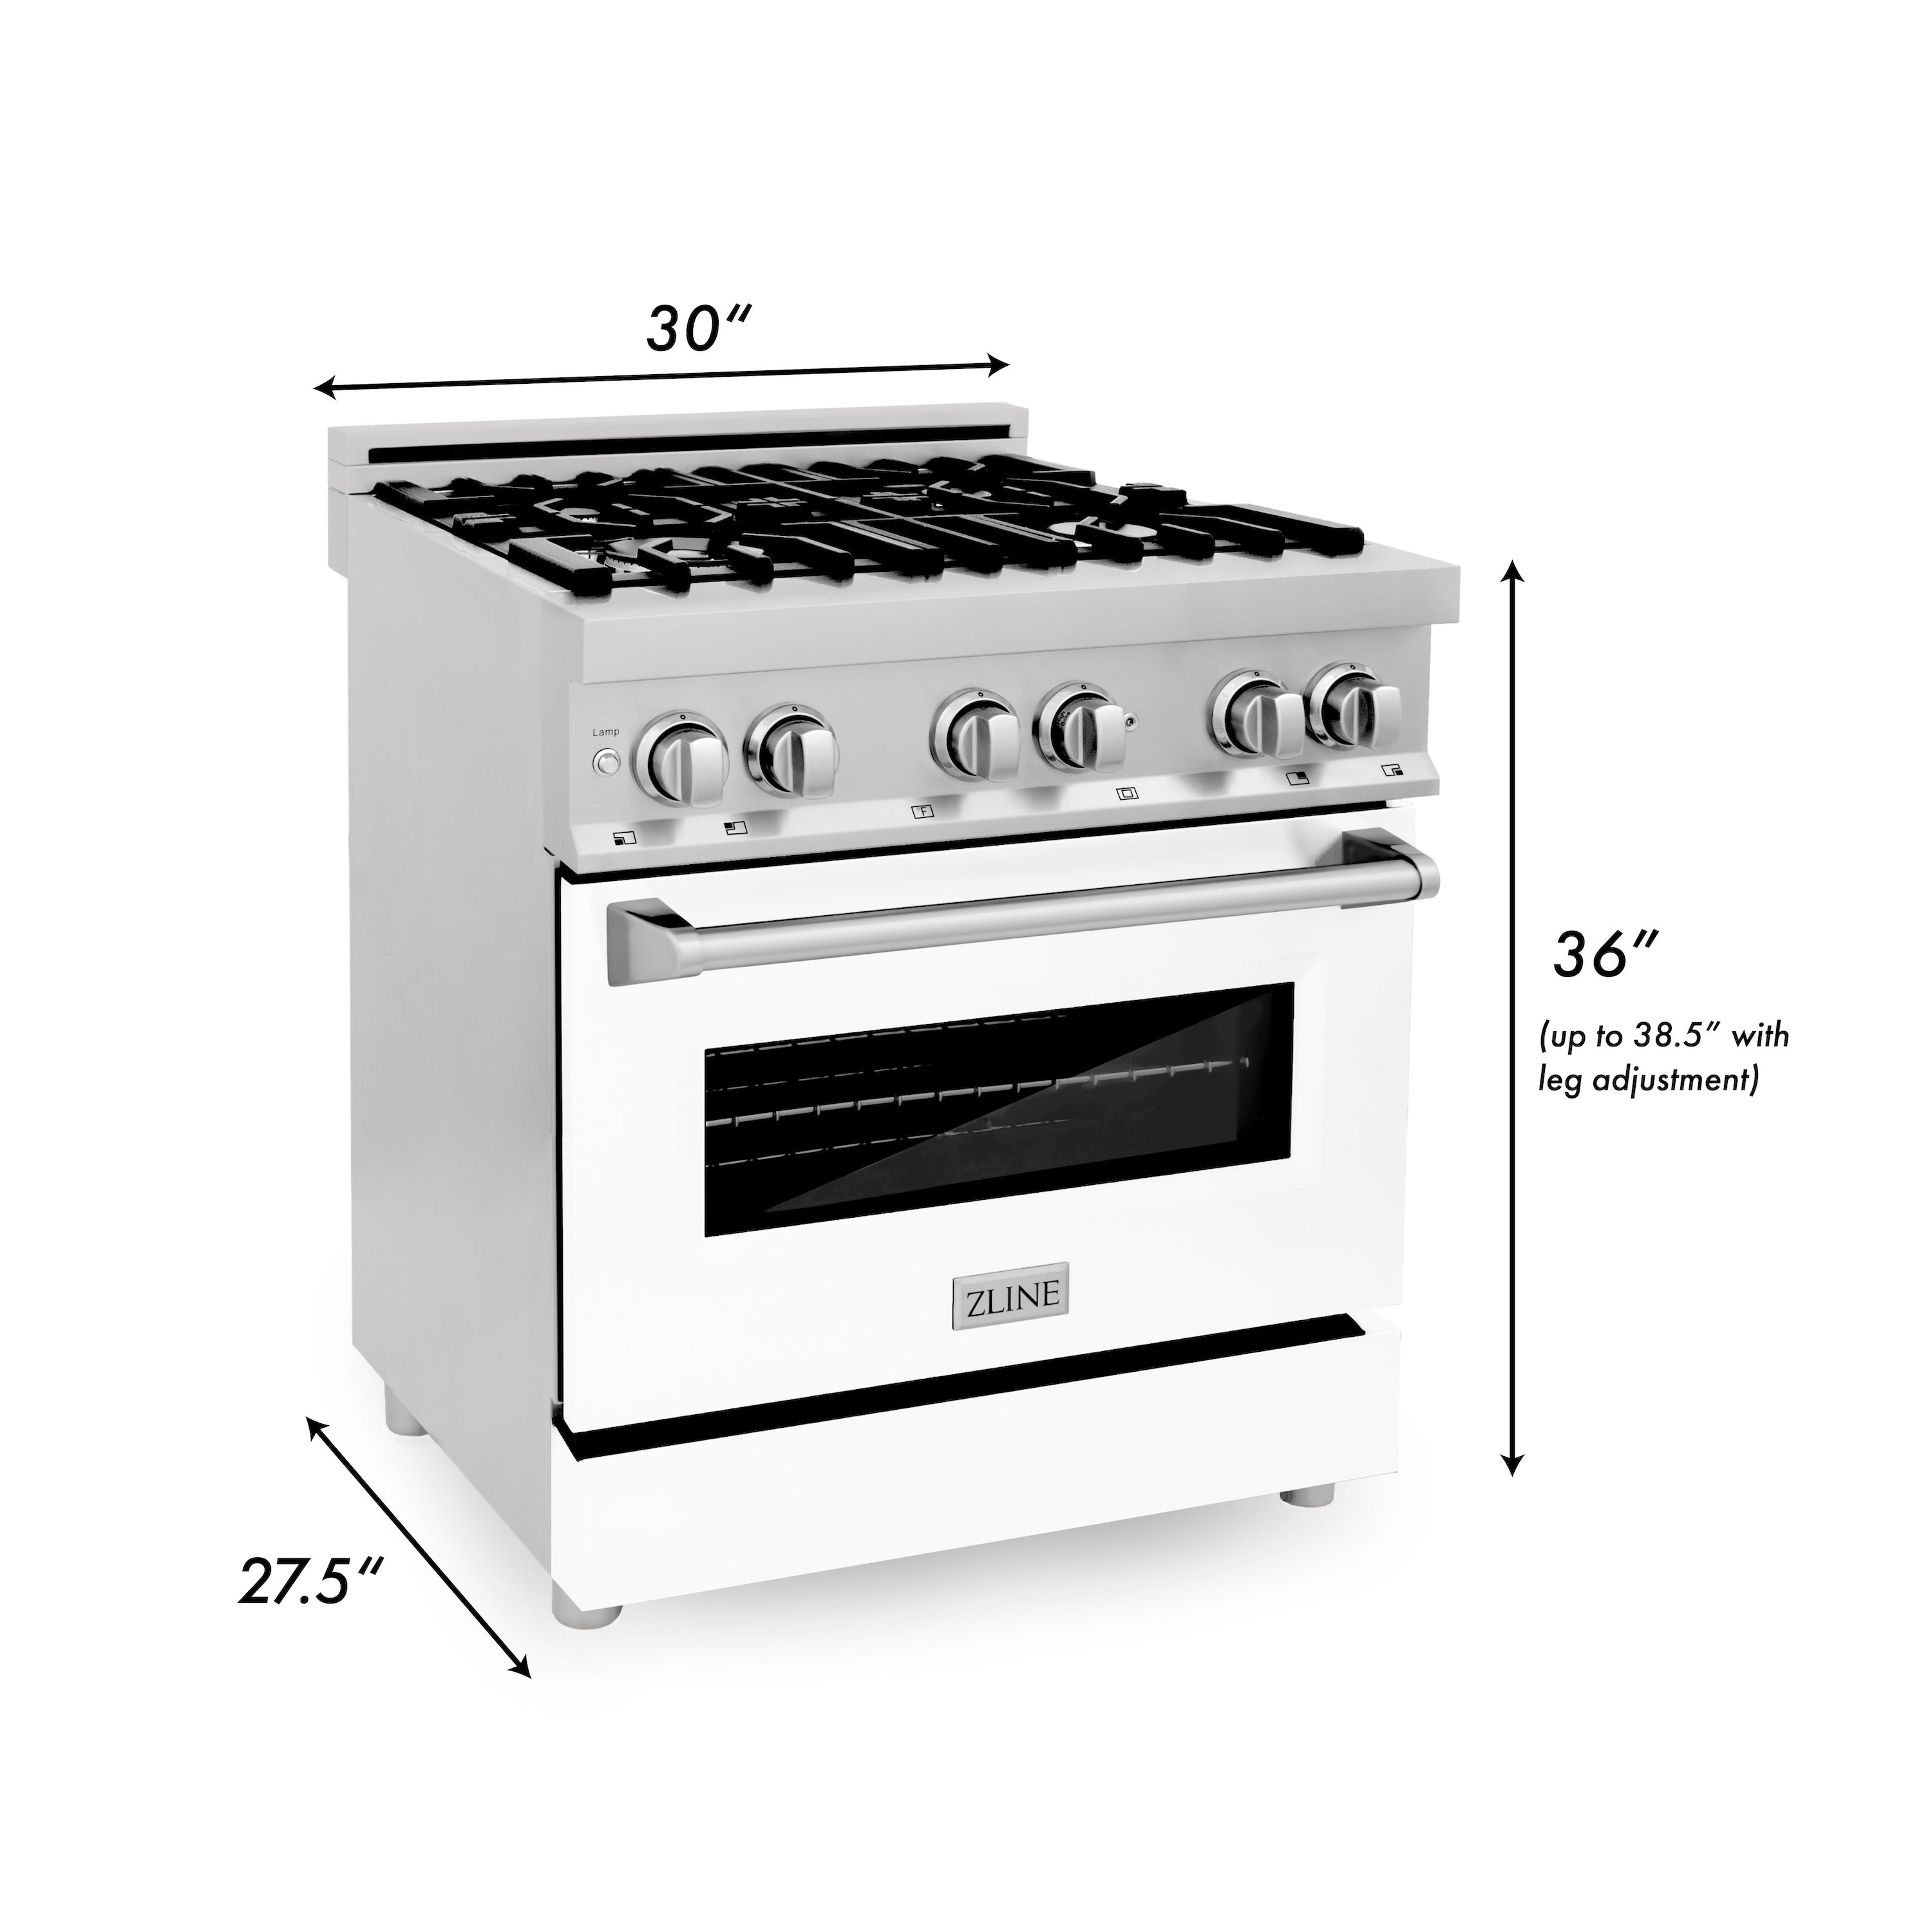 ZLINE 30" 4.0 cu. ft. Electric Oven and Gas Cooktop Dual Fuel Range with Griddle and White Matte Door in Stainless Steel (RA-WM-GR-30)